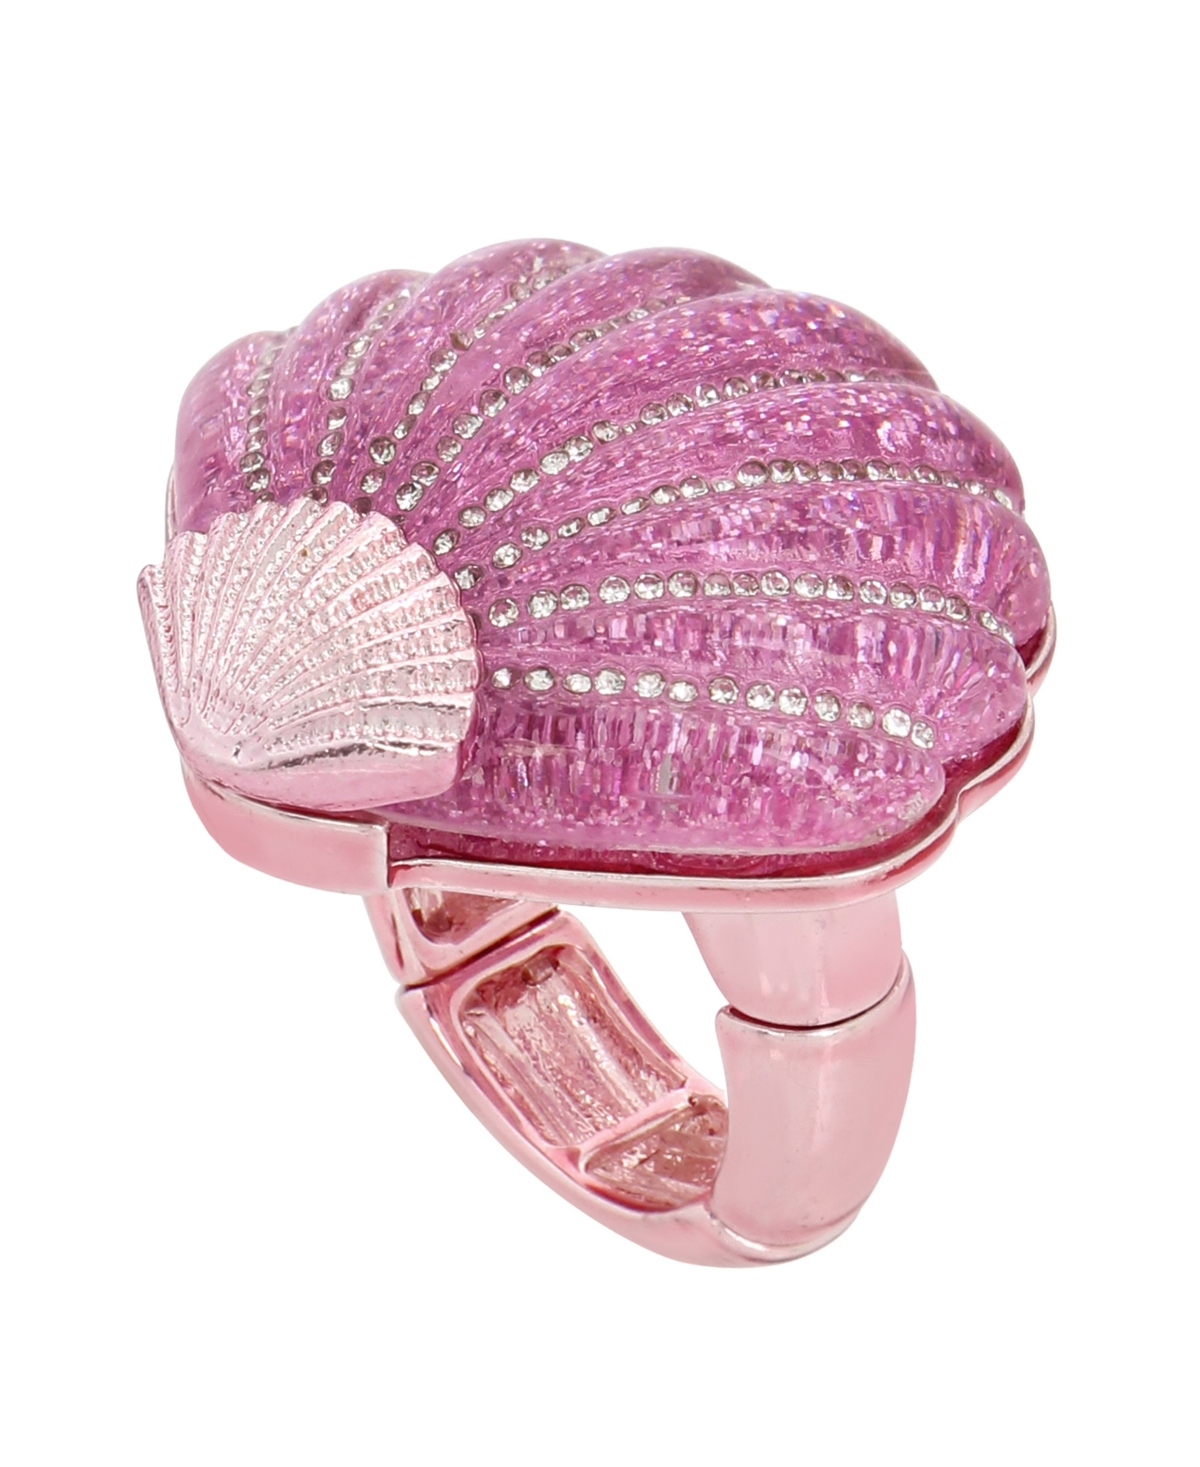 Faux Stone Seashell Cocktail Ring - Pink